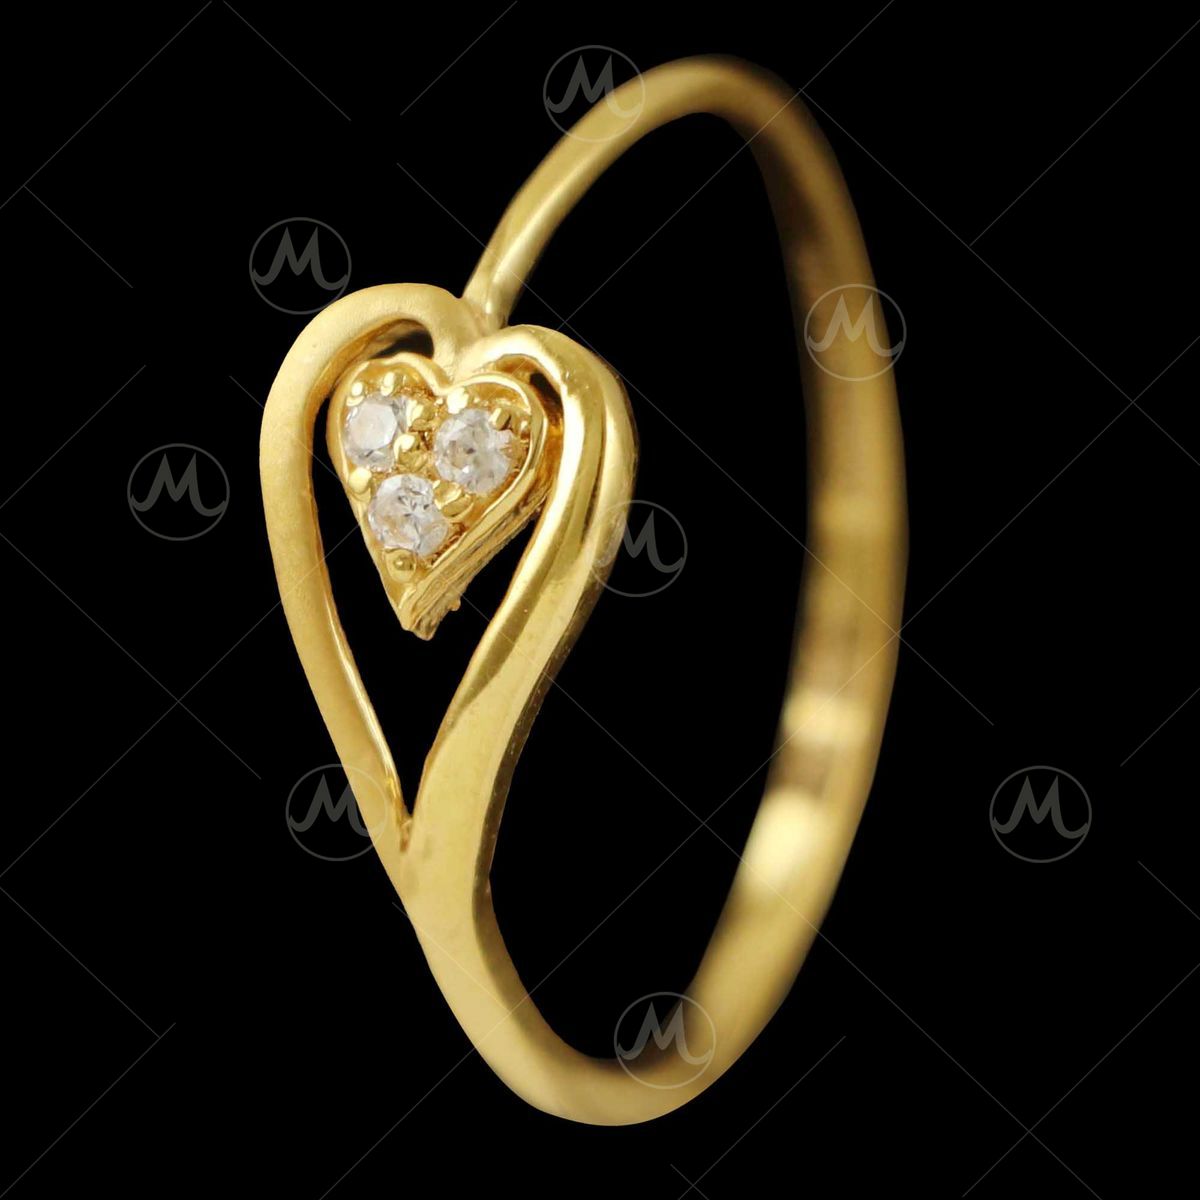 Buy quality 22kt/916 yellow gold cz casting ring for women in Ahmedabad